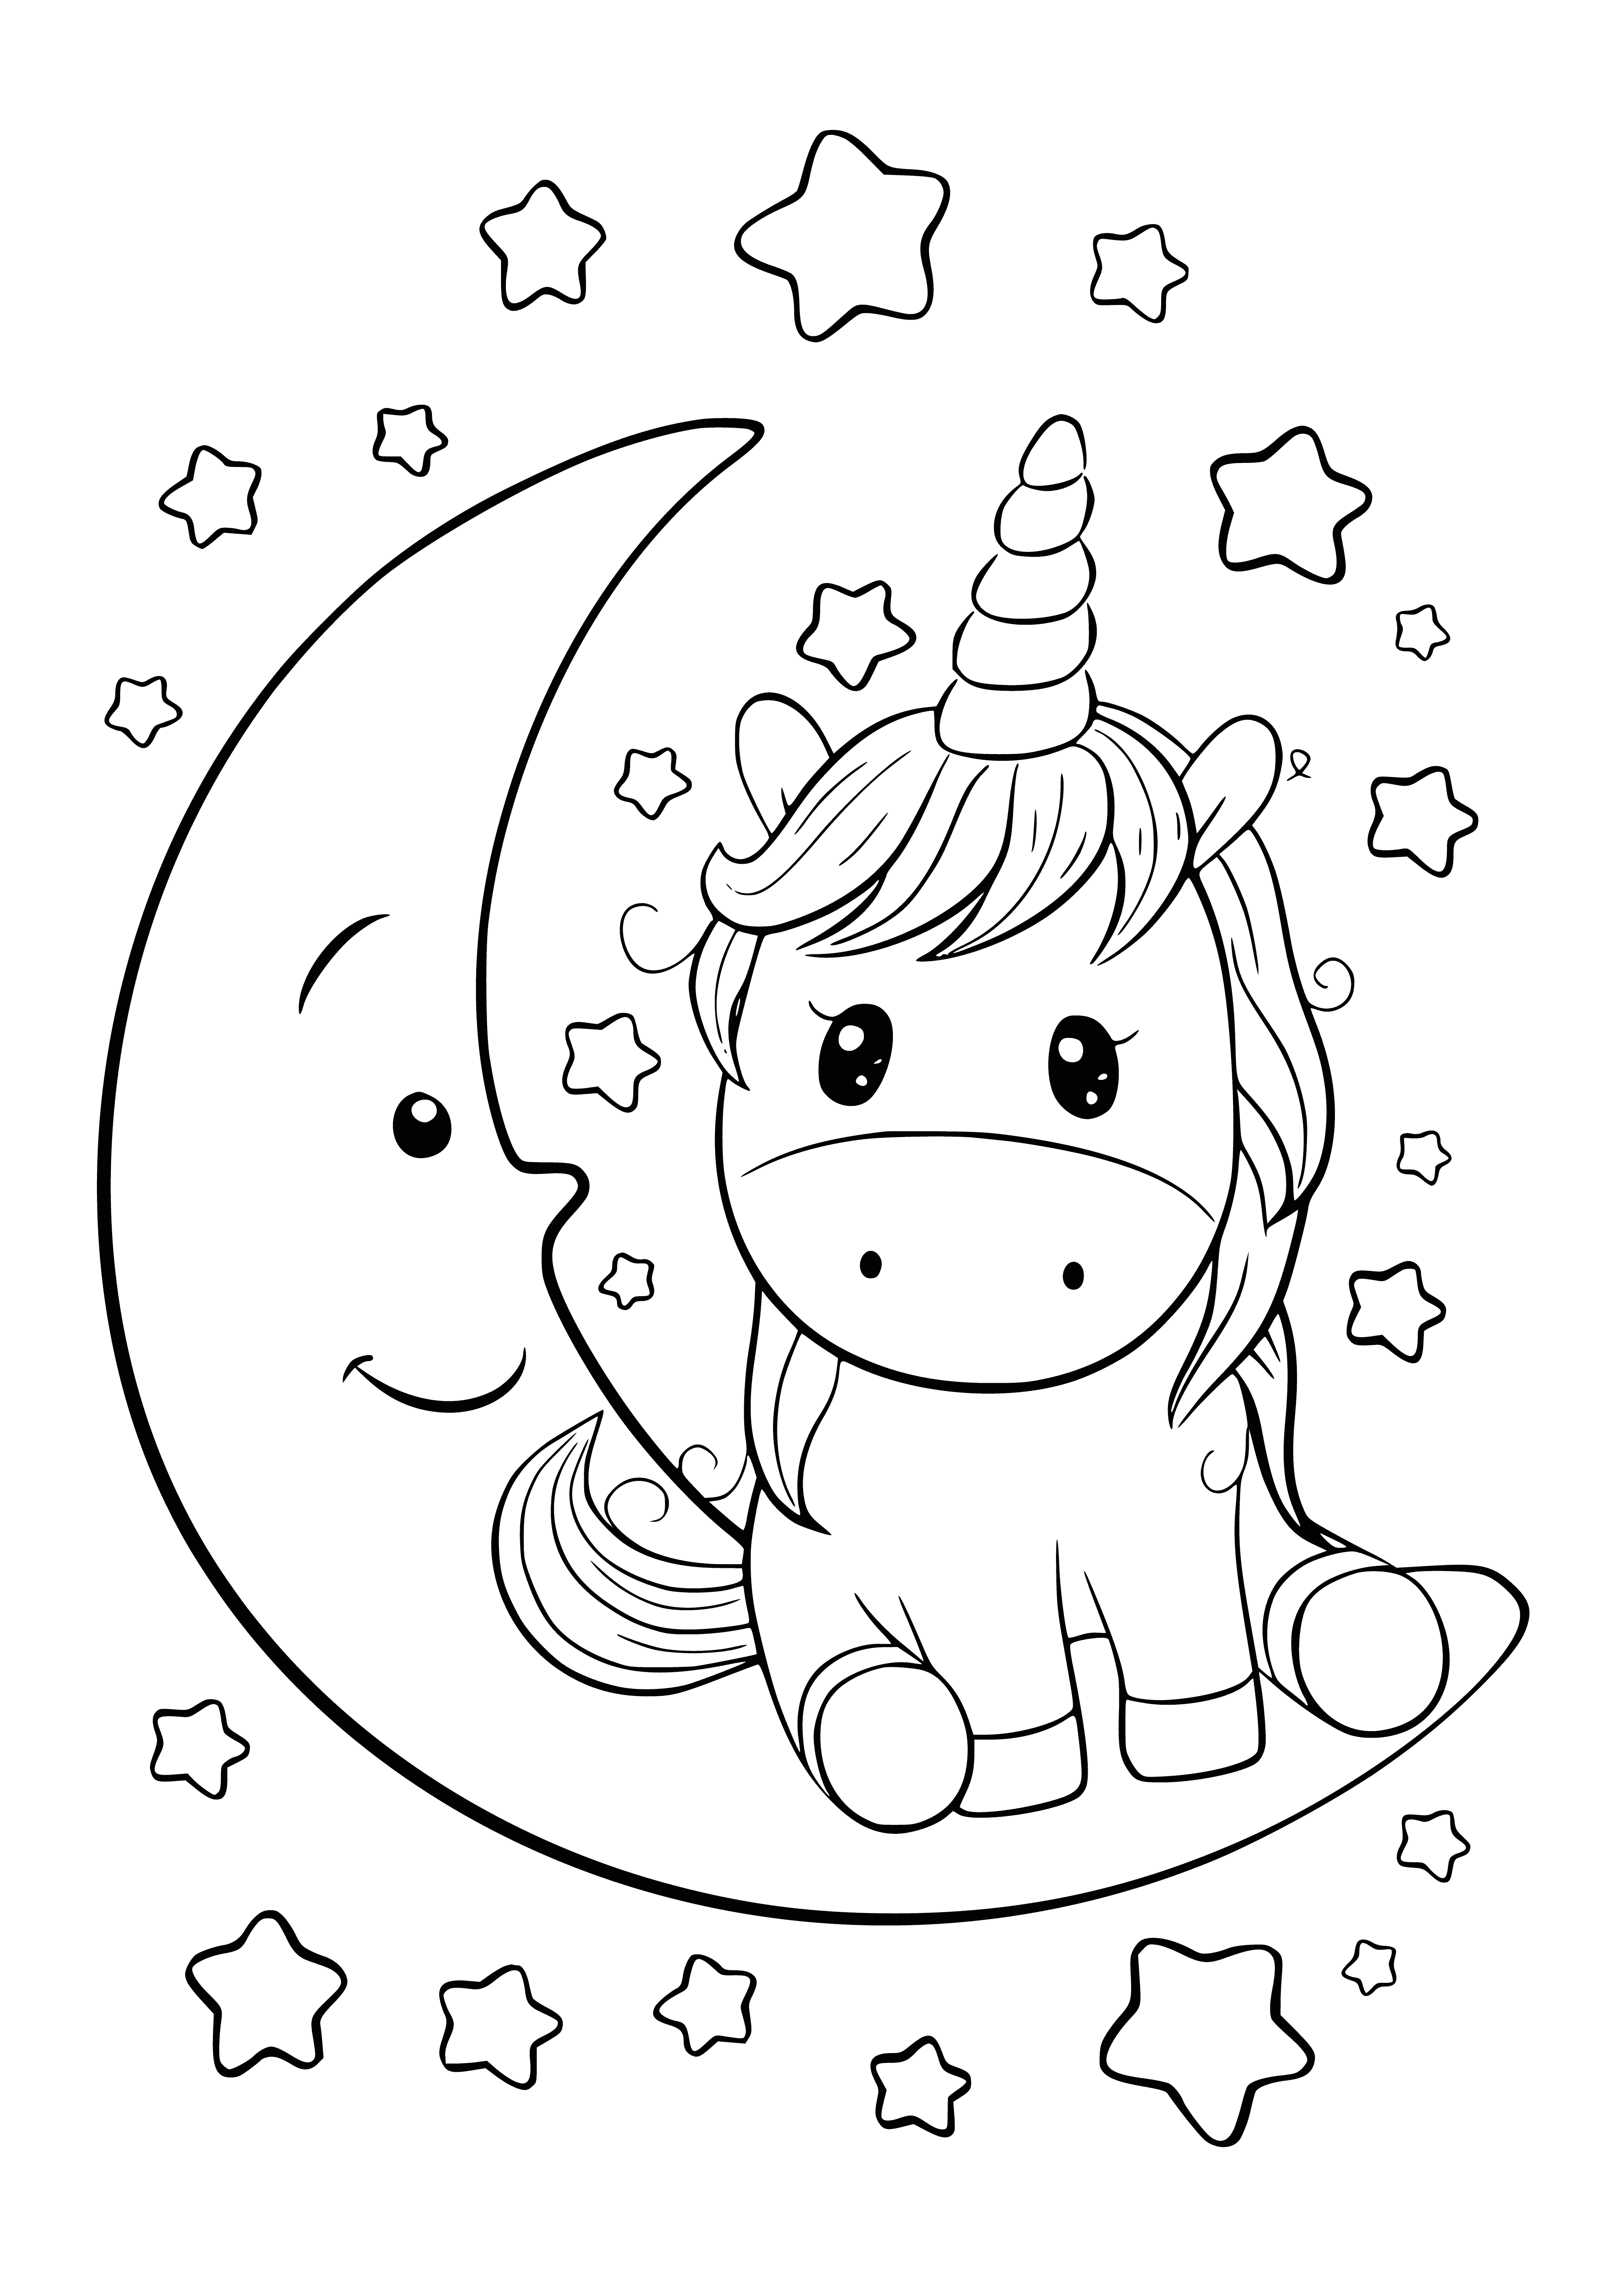 coloring page: A colorful unicorn with big eyes and a cute face to color! #Coloring #Unicorns